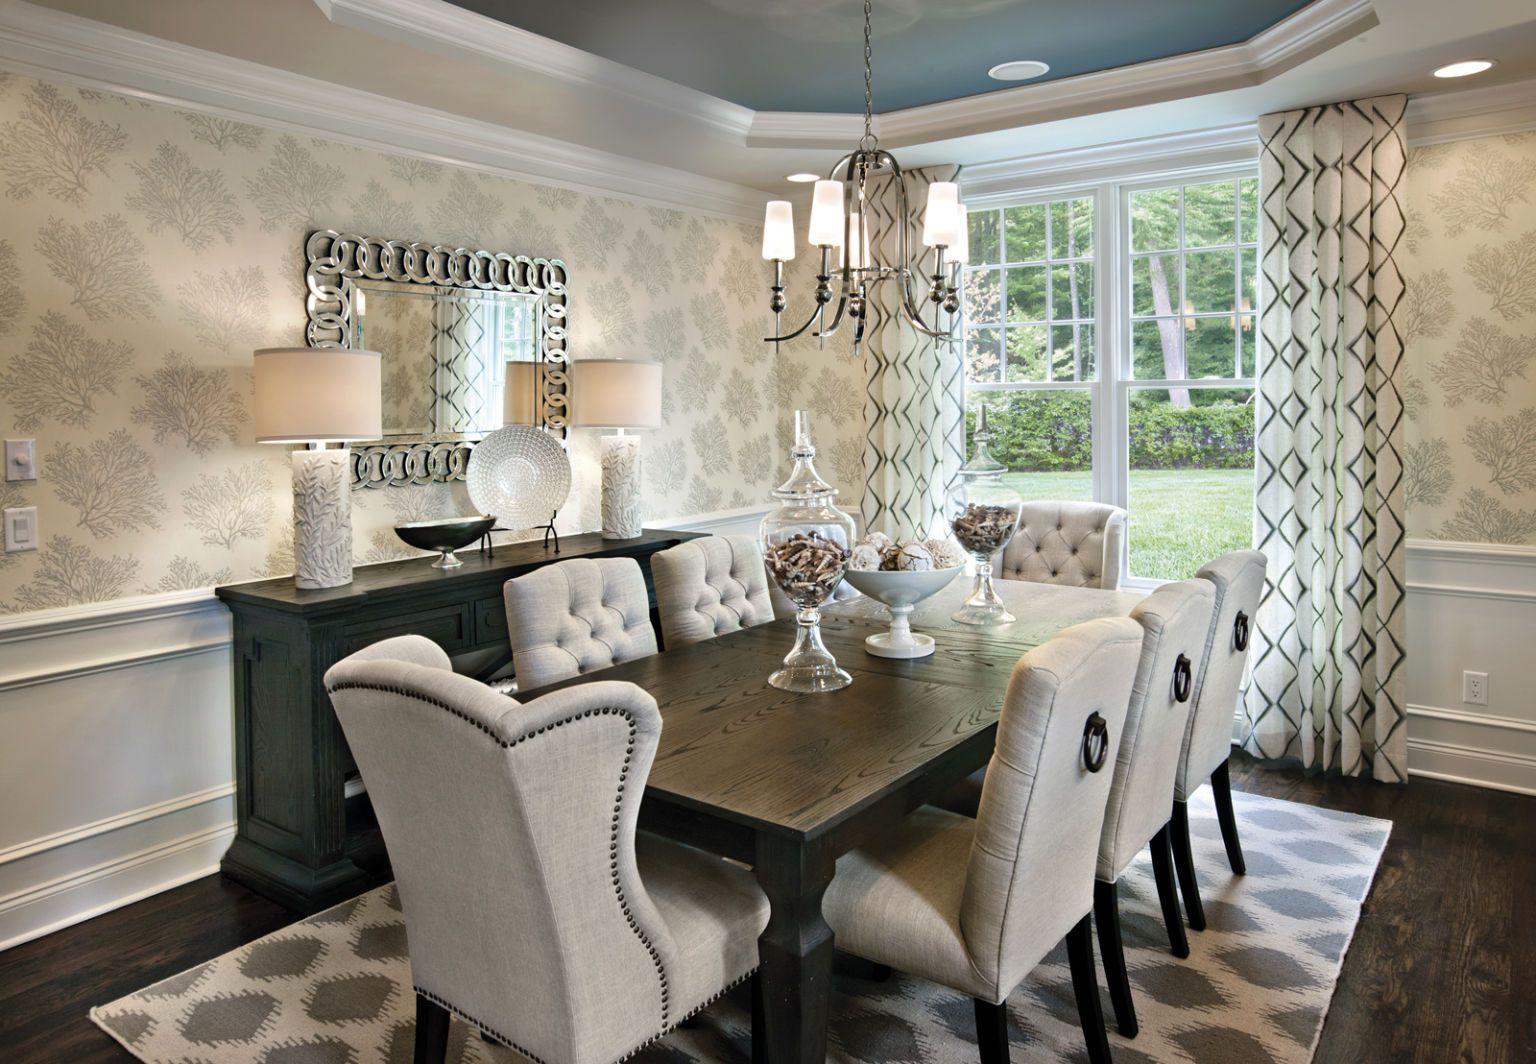 1536 x 1064 · jpeg - 50 Ways to Re-imagine Your Dream Dining Spot | Dining room wallpaper ...